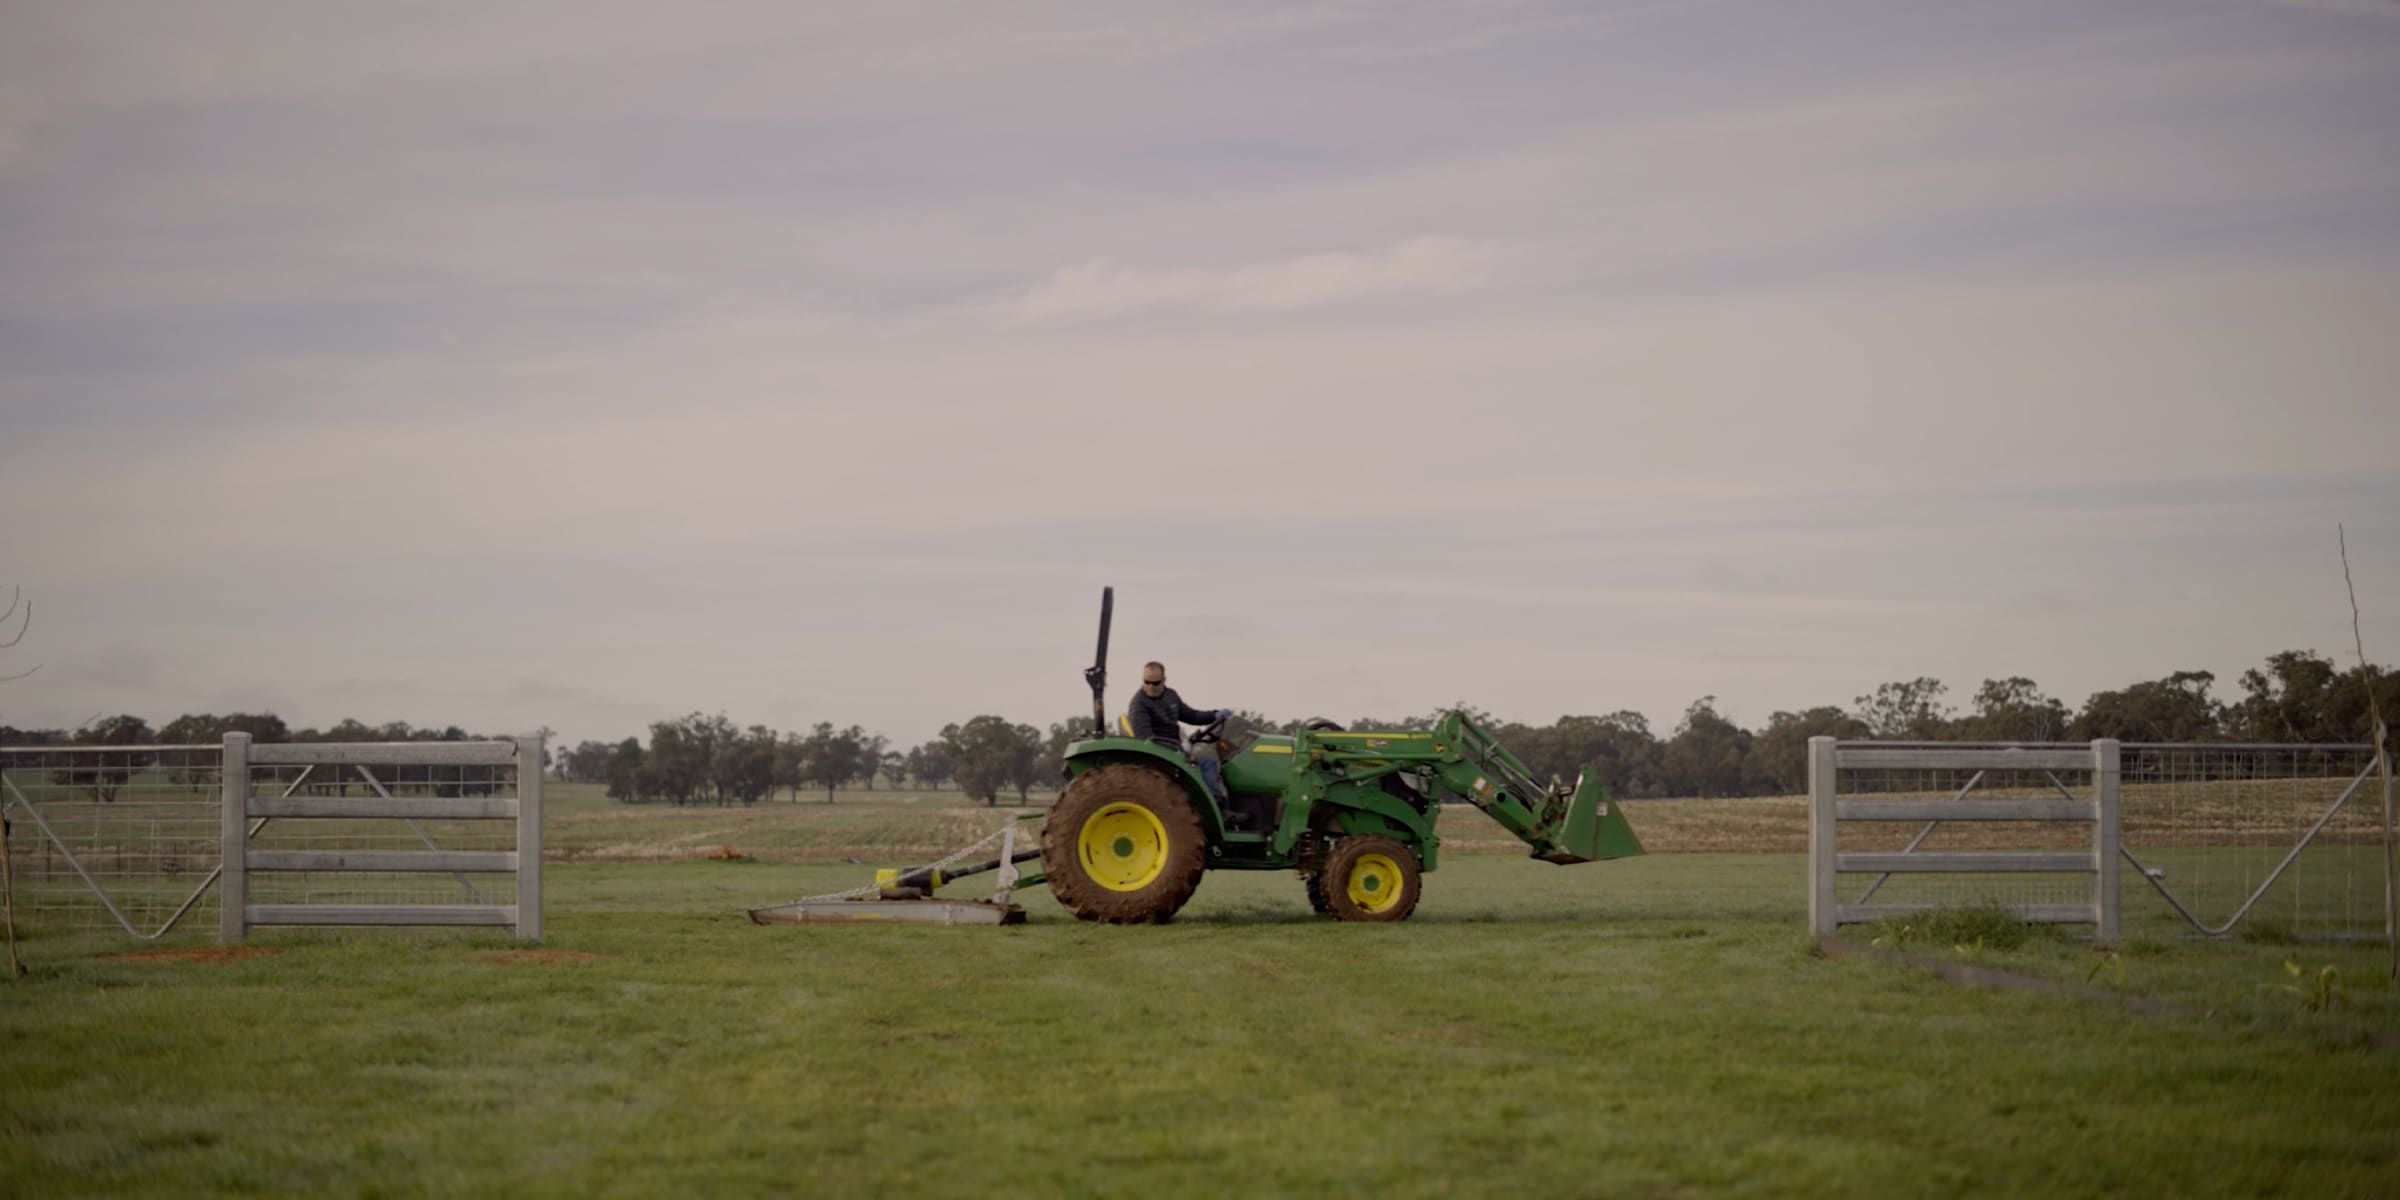 A John Deere utility tractor in the middle of a paddock